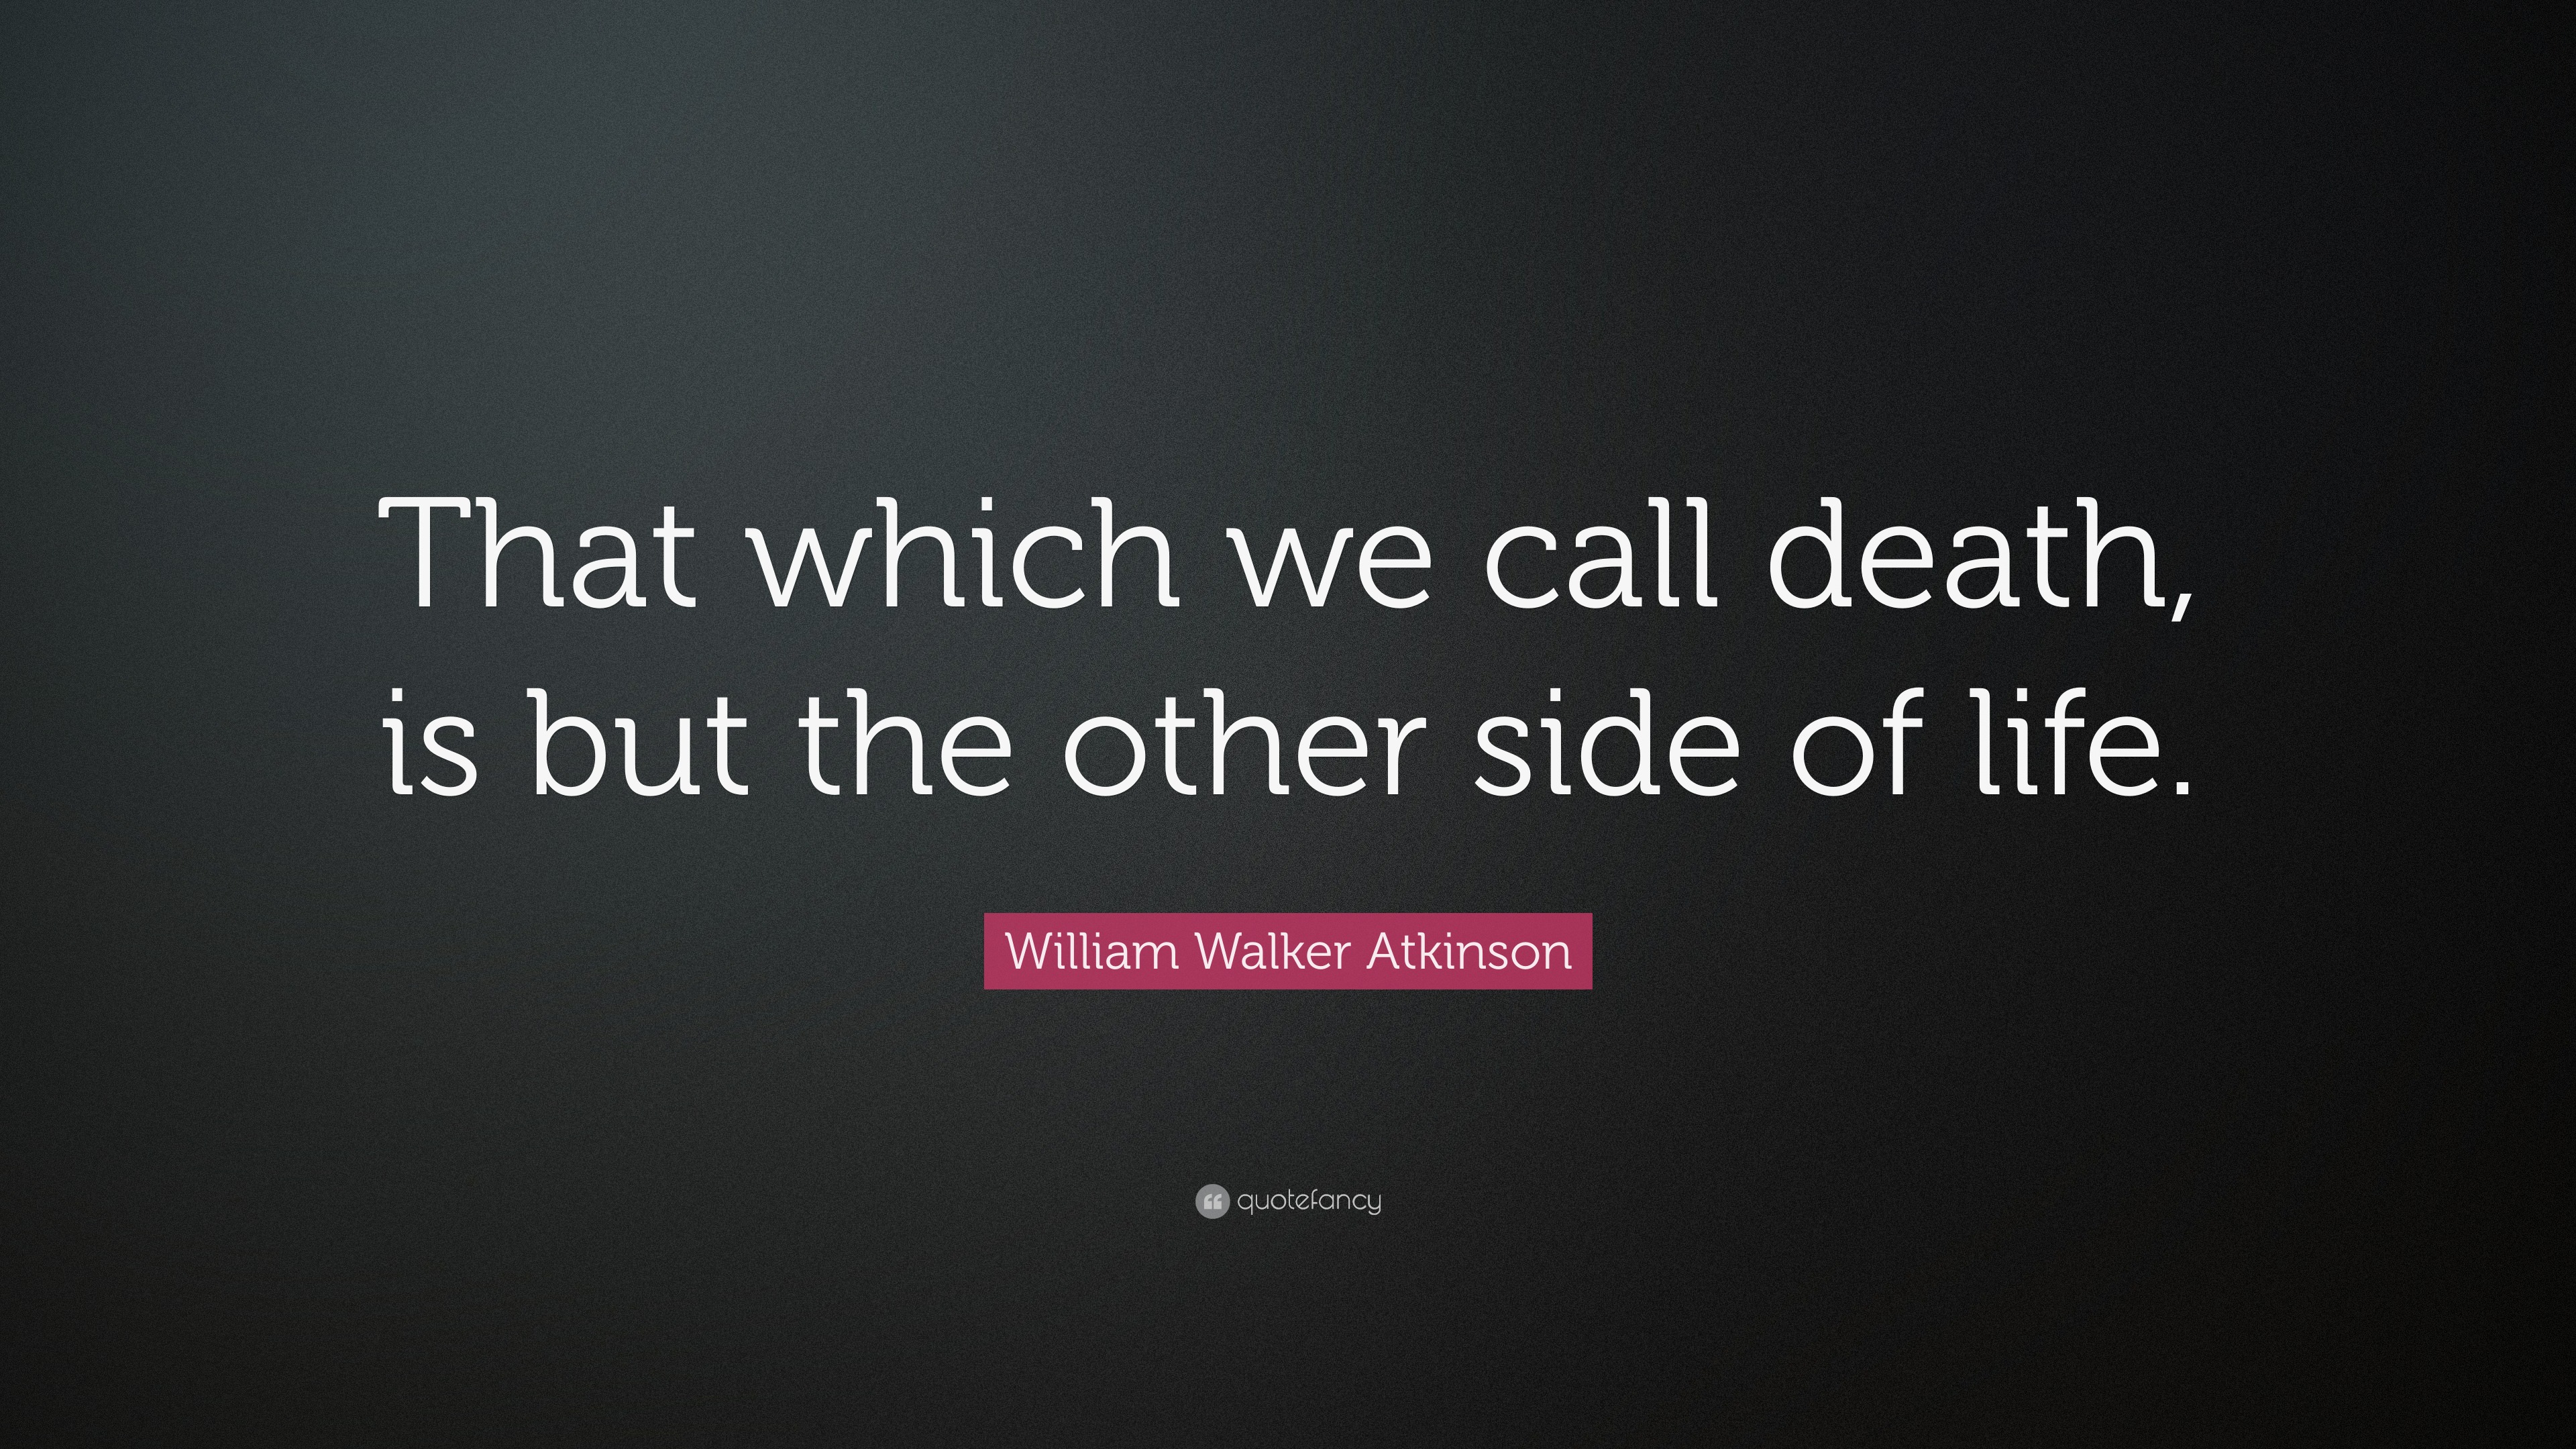 William Walker Atkinson Quote: “That which we call death, is but the ...